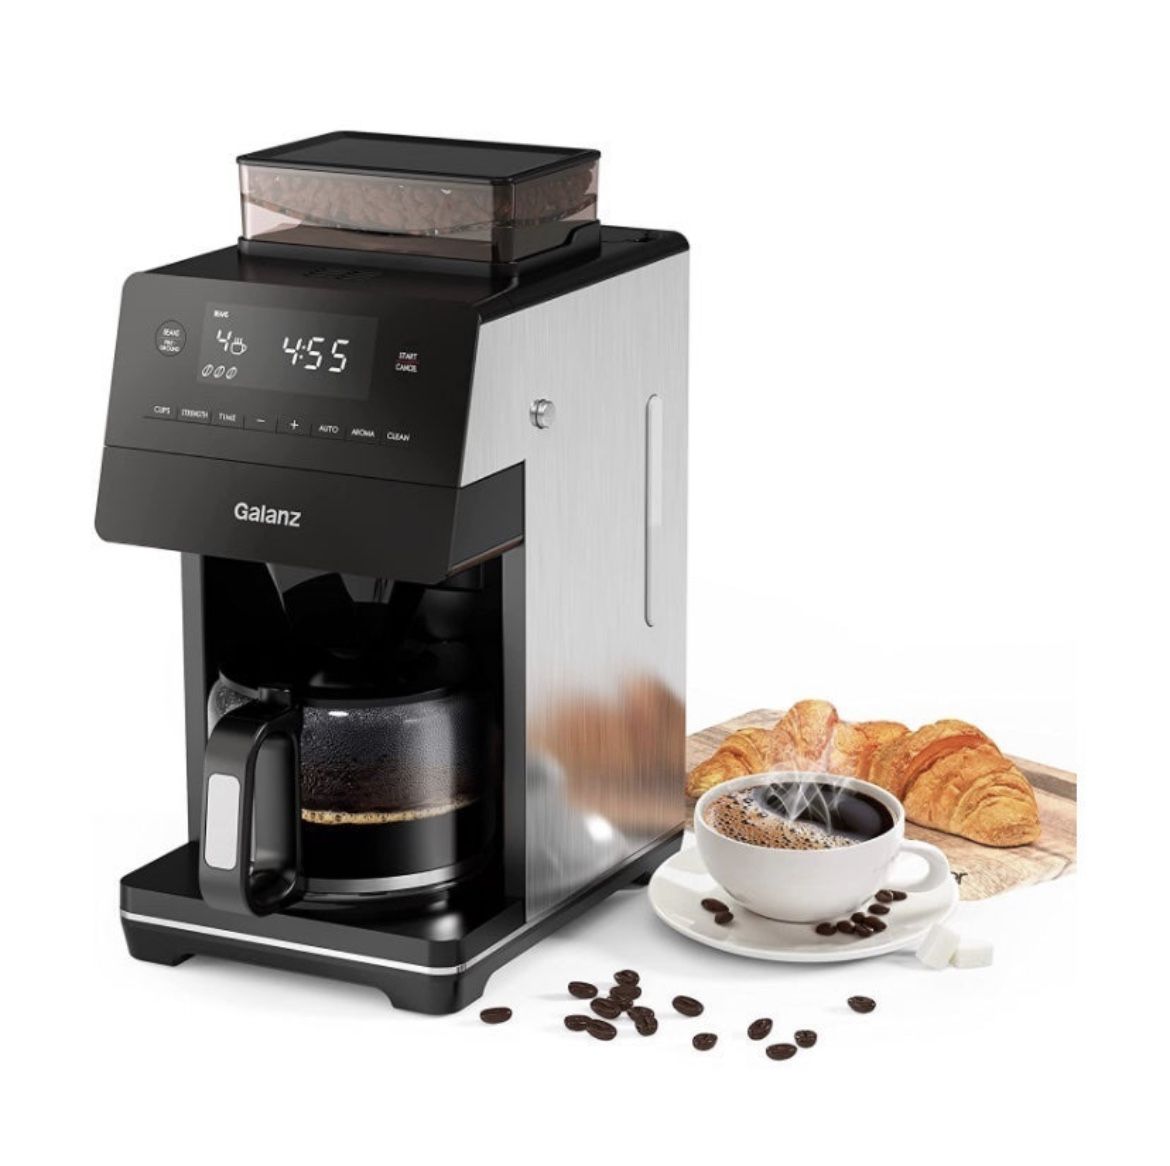 Galanz 2-in-1 Grind and Brew Coffee Maker with Adjustable Grind Size #2975